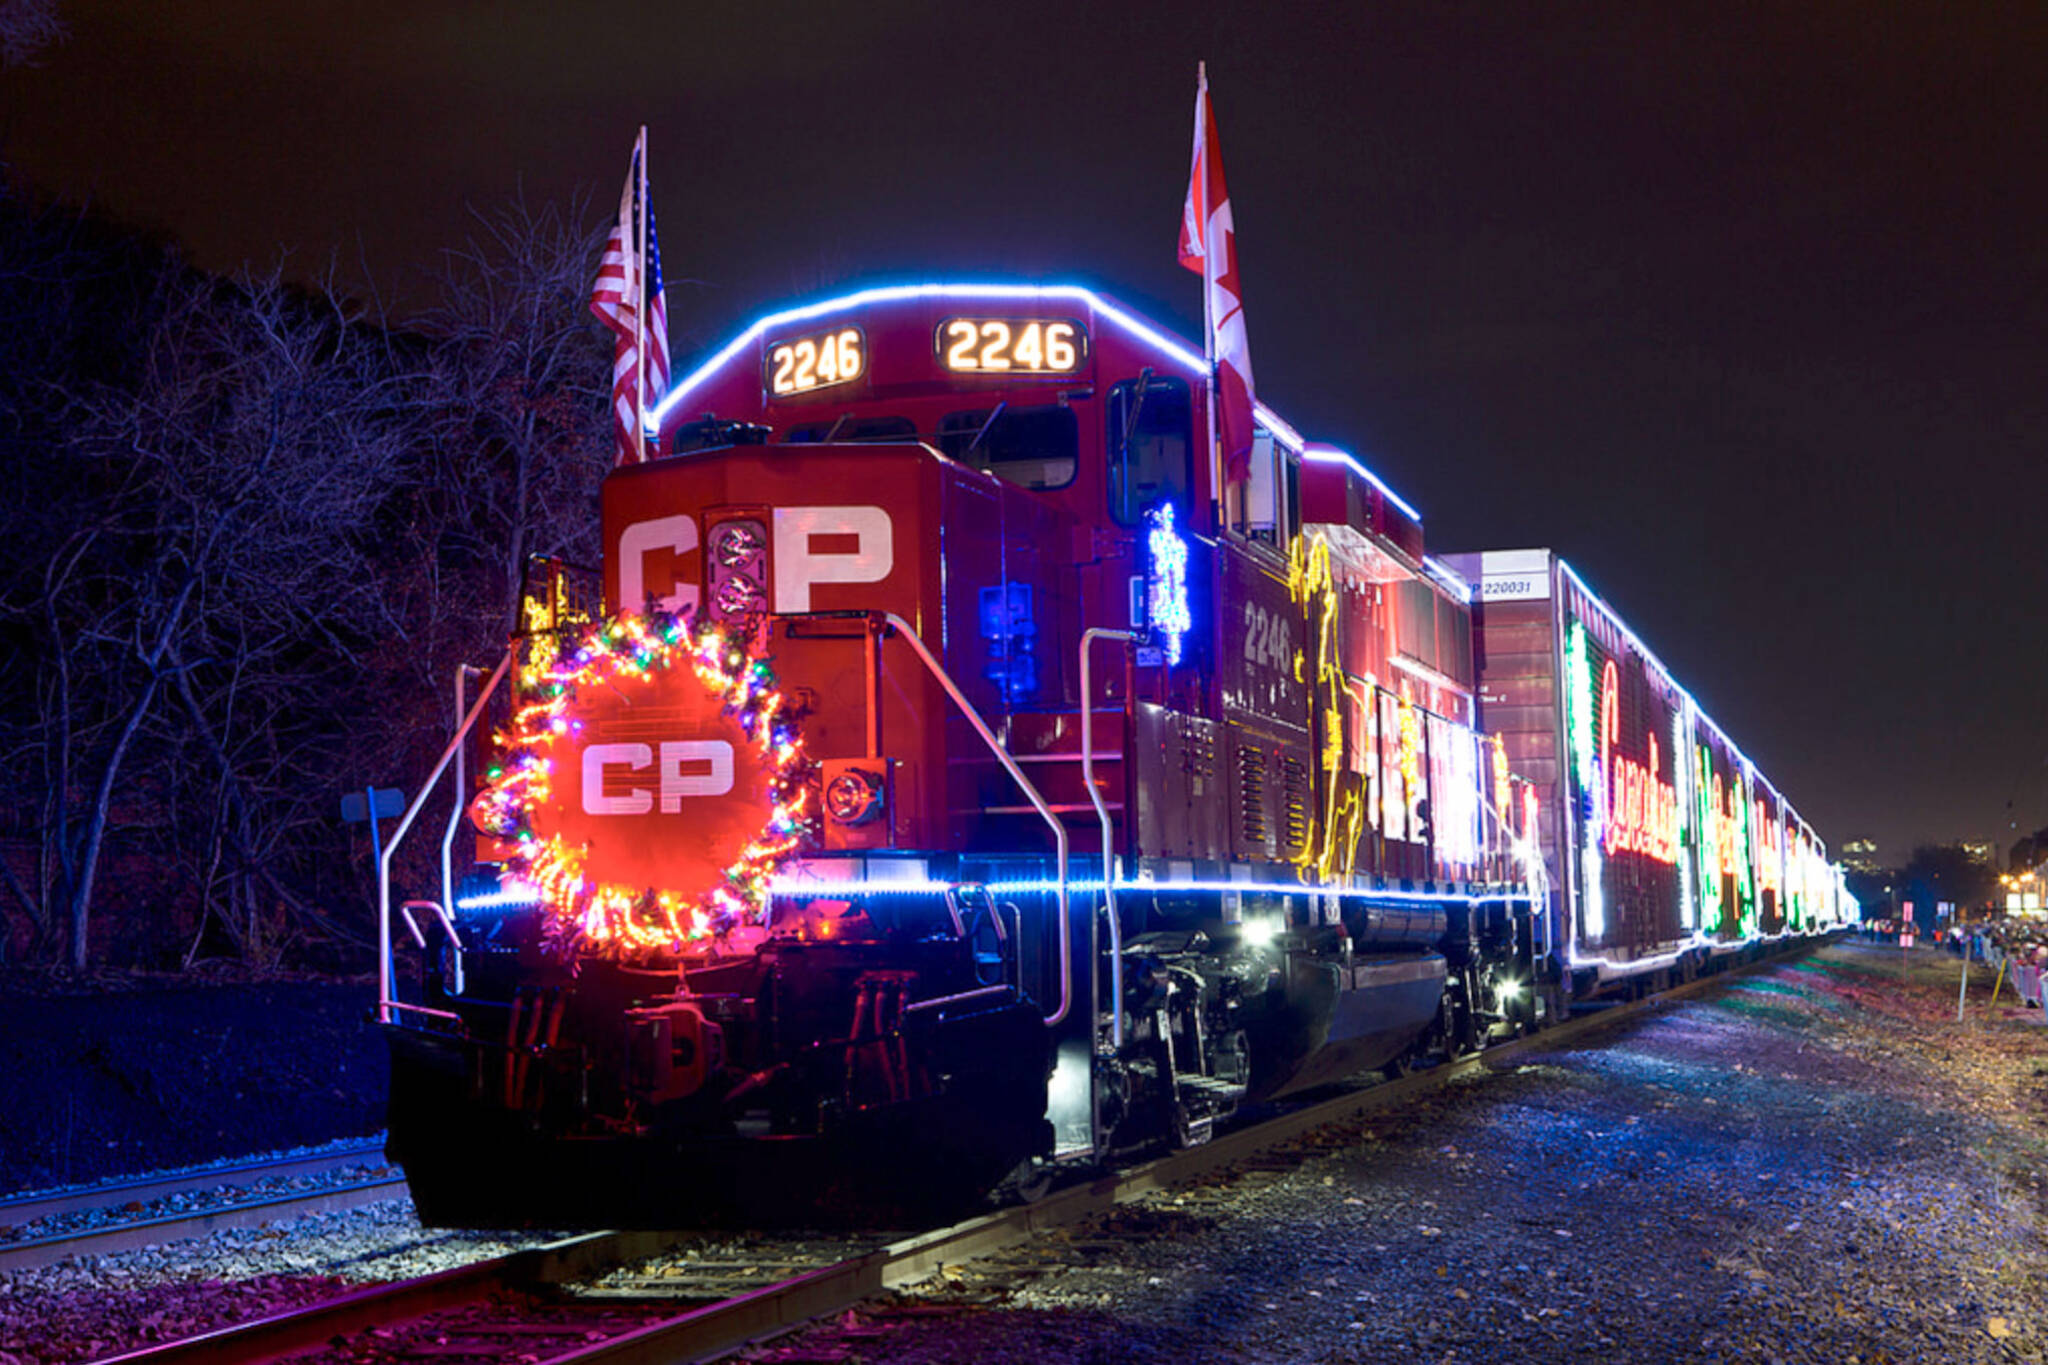 10 dazzling photos of the holiday train in Toronto